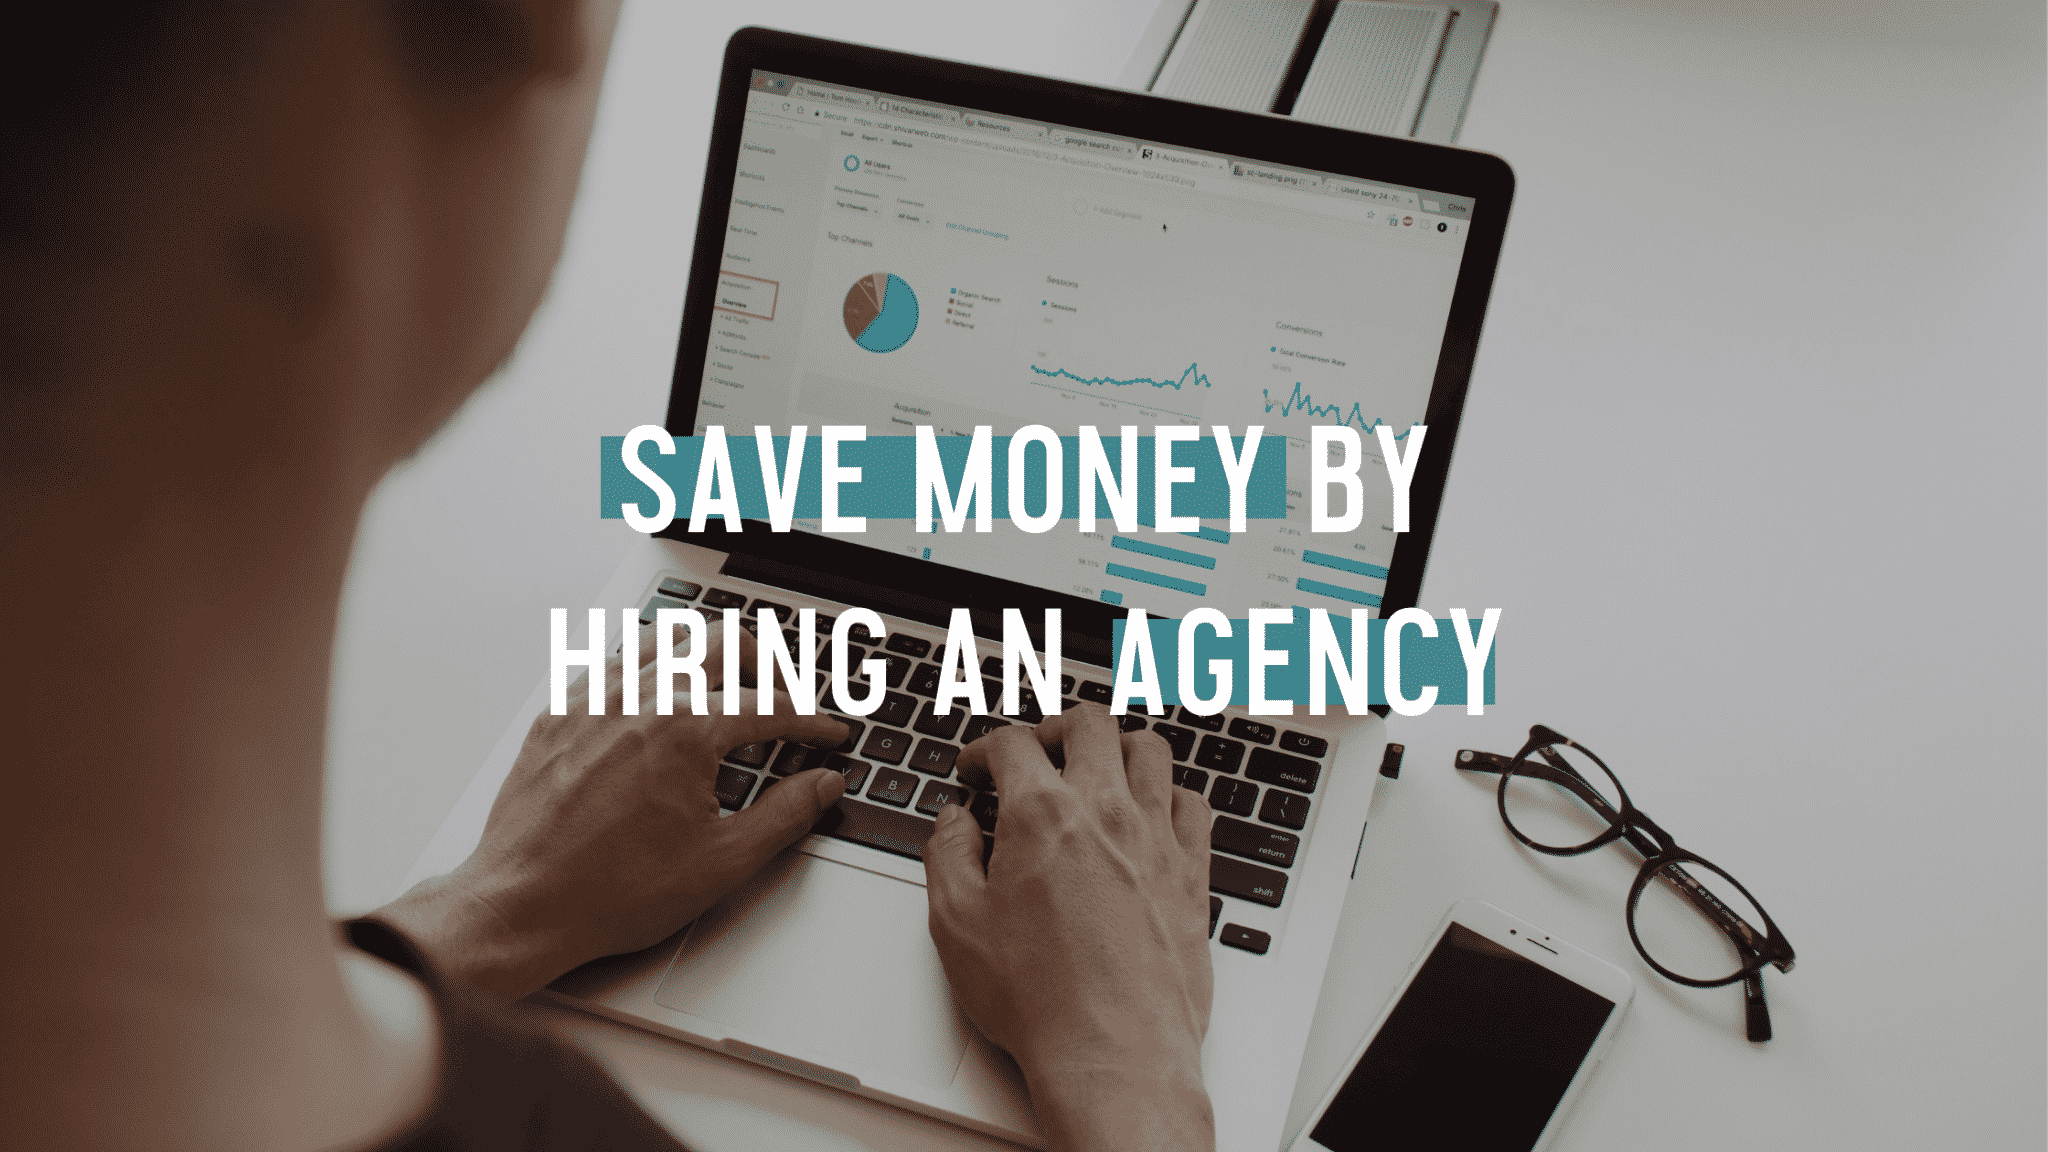 Featured image for “Save Money by Hiring an Agency for Your Marketing”